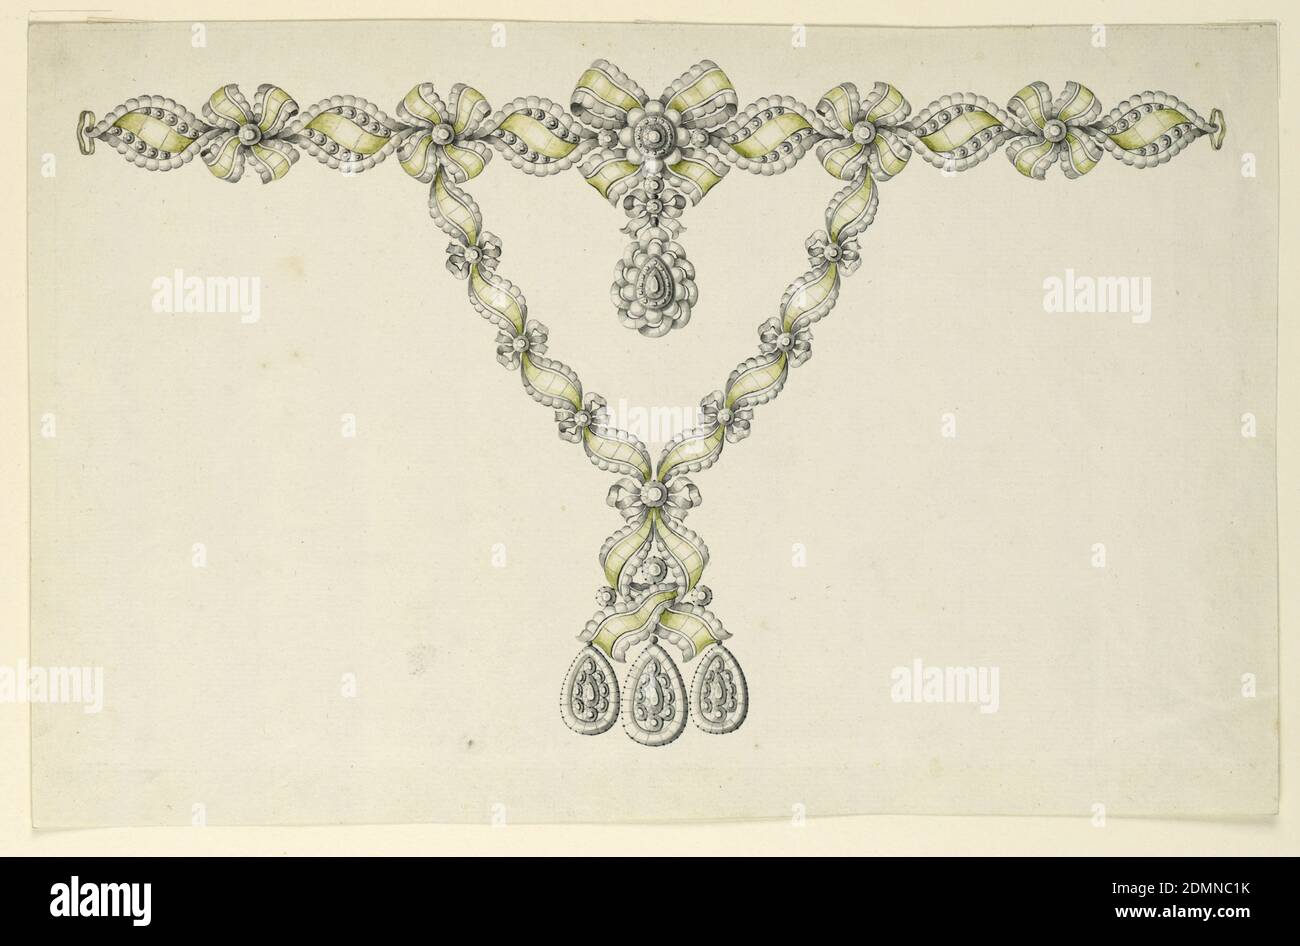 Design for a Necklace, Pen and black ink, brush and green, yellow, gray watercolor on light green paper, Jewelry design for a necklace. The chain around the neck consists of printed ovals containing a scroll of ribbon between two rows of disks, à jour, connected by knots. Hanging from the central one is a drop with a small knot above. The hanging chains are composed of similar ovals and knots, but the character of a ribbon is more emphasized. They are fastened by a knot, with ends hanging down interlaced, and supporting three drops., probably Naples, South Italy, Italy, ca. 1780, jewelry Stock Photo